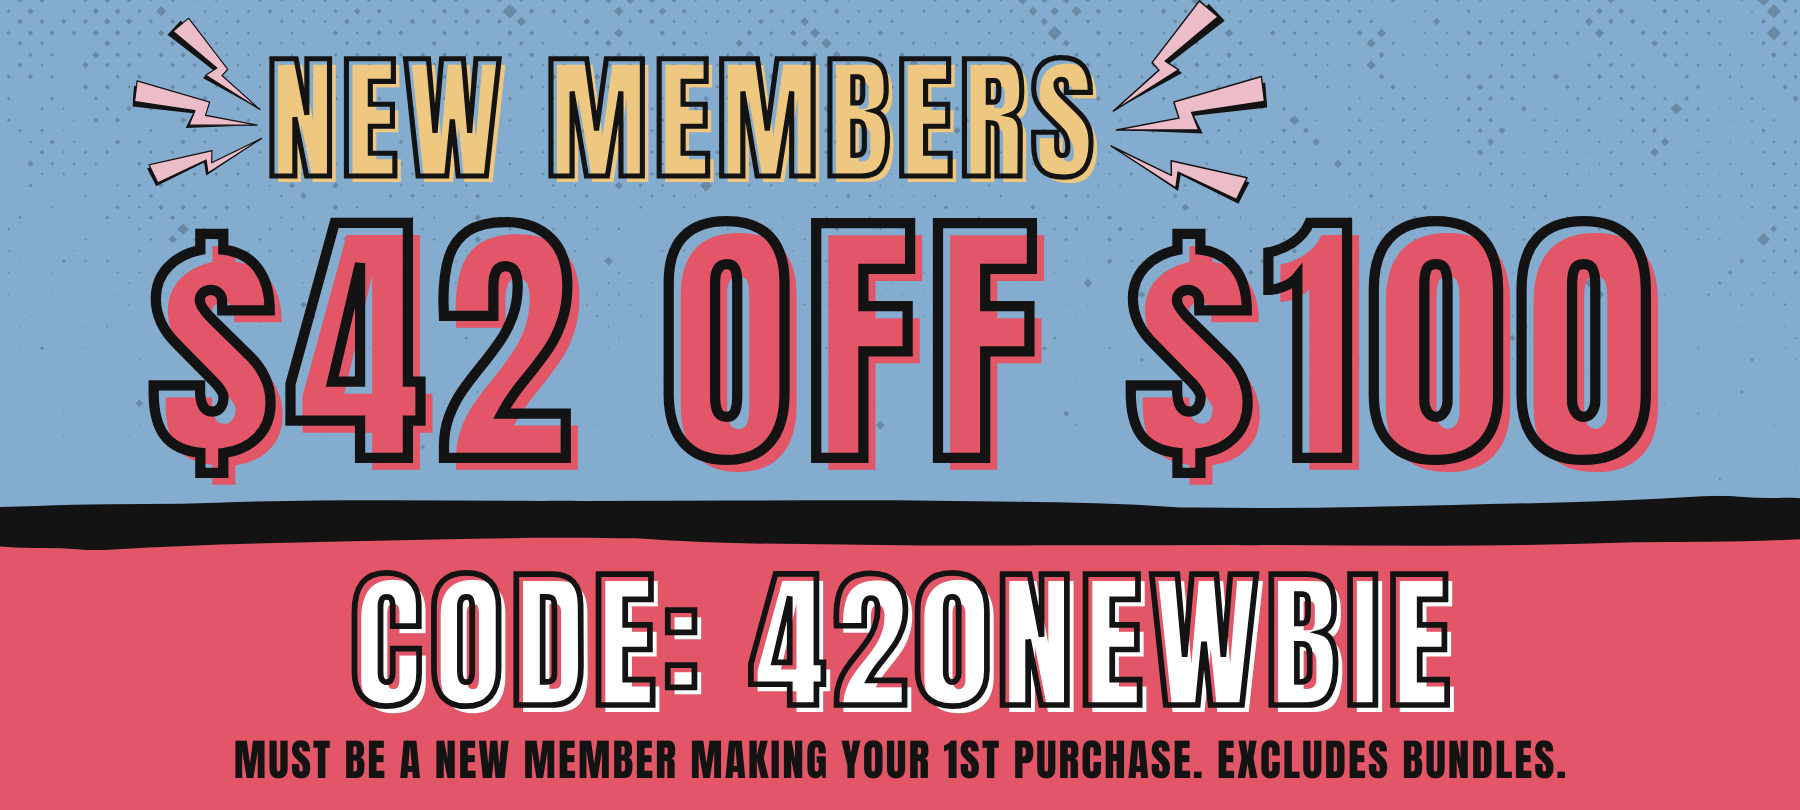 New Members making their 1st purchase get $42 off $100 (excludes bundles). Use code: 420NEWBIE